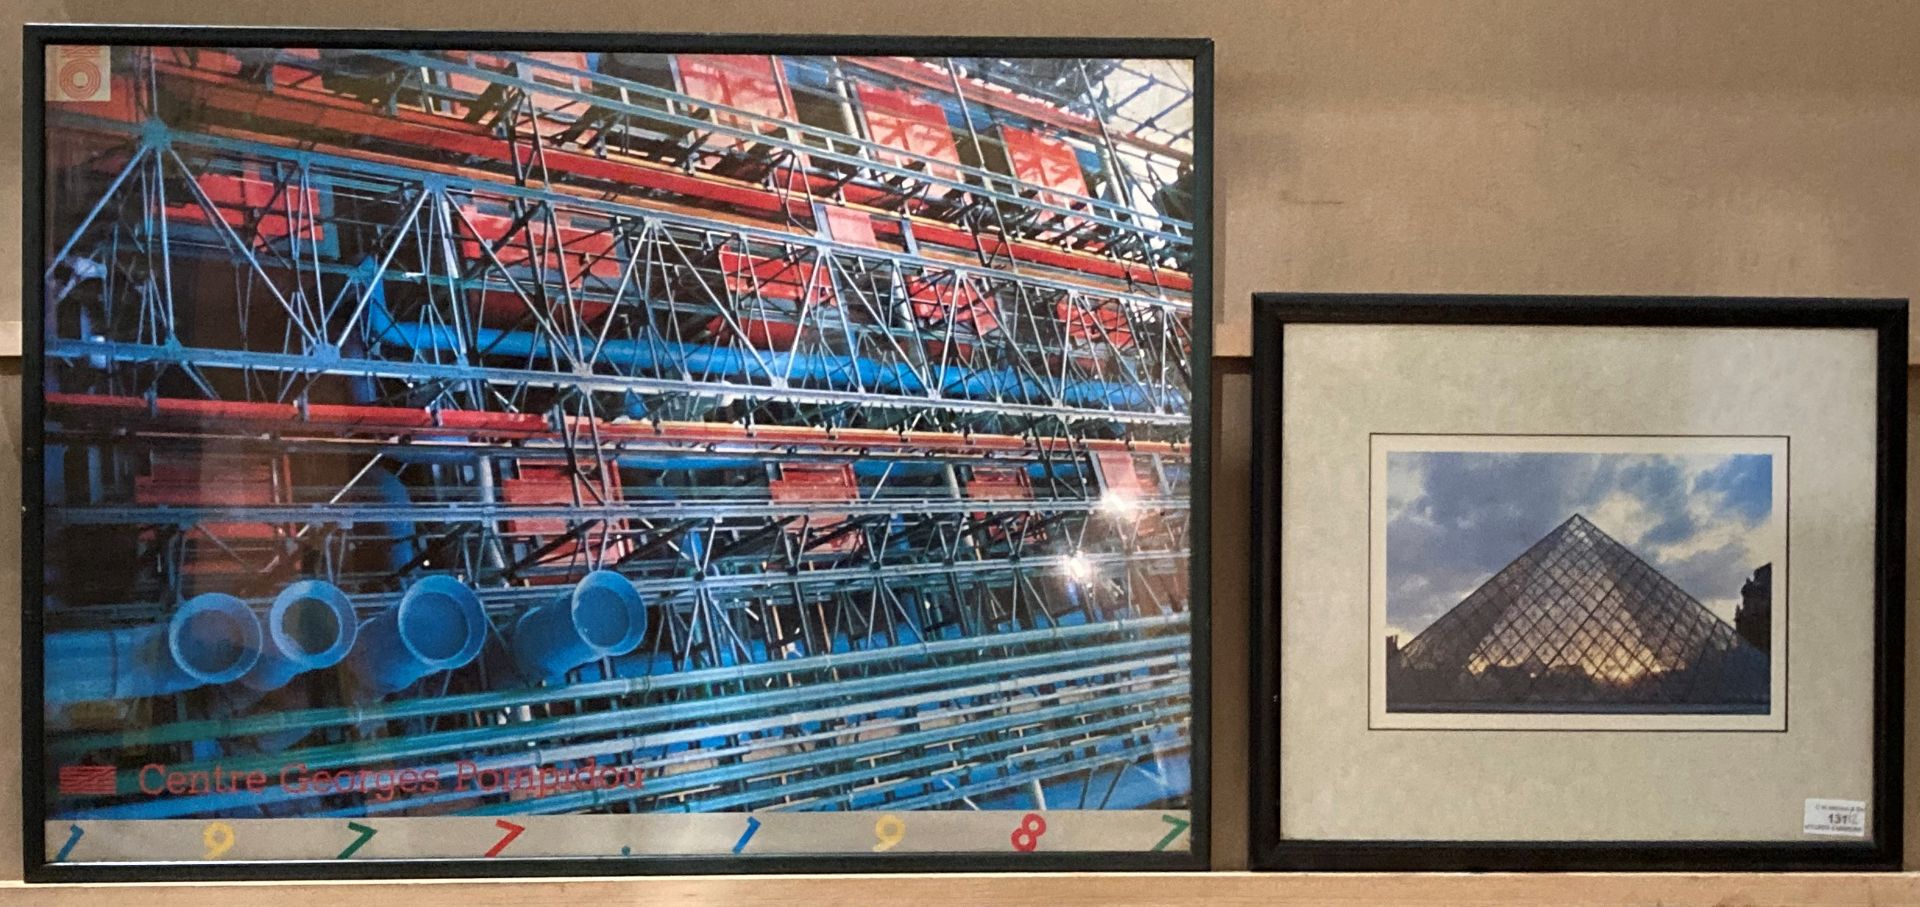 Centre Georges Pompidou, framed print, 50cm x 70cm, and another external view of the Louvre Museum,